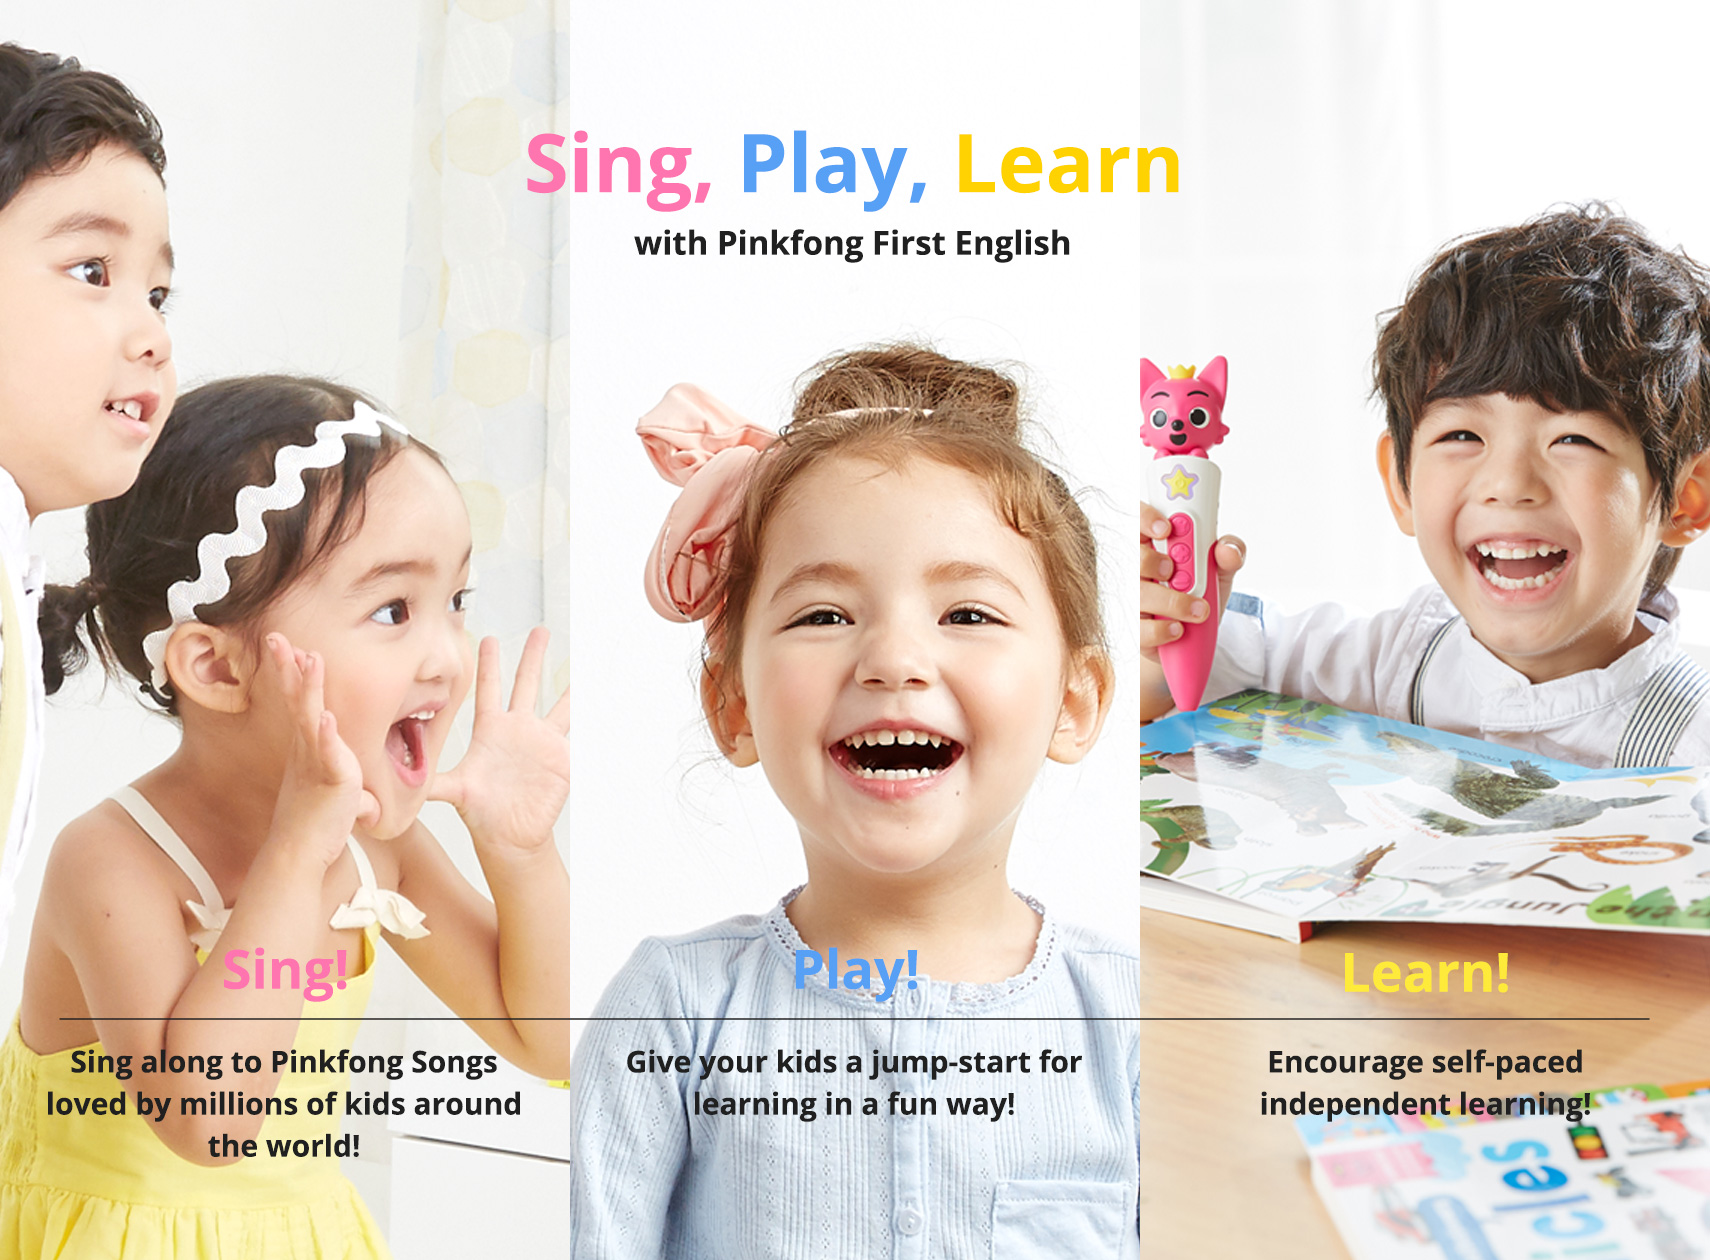 Sing, Play, Learn with Pinkfong First English. Sing along to Pinkfong Songs loved by millions of kids around the world! Give your kids a jump-start for learning in a fun way! Encourage self-paced independent learning!